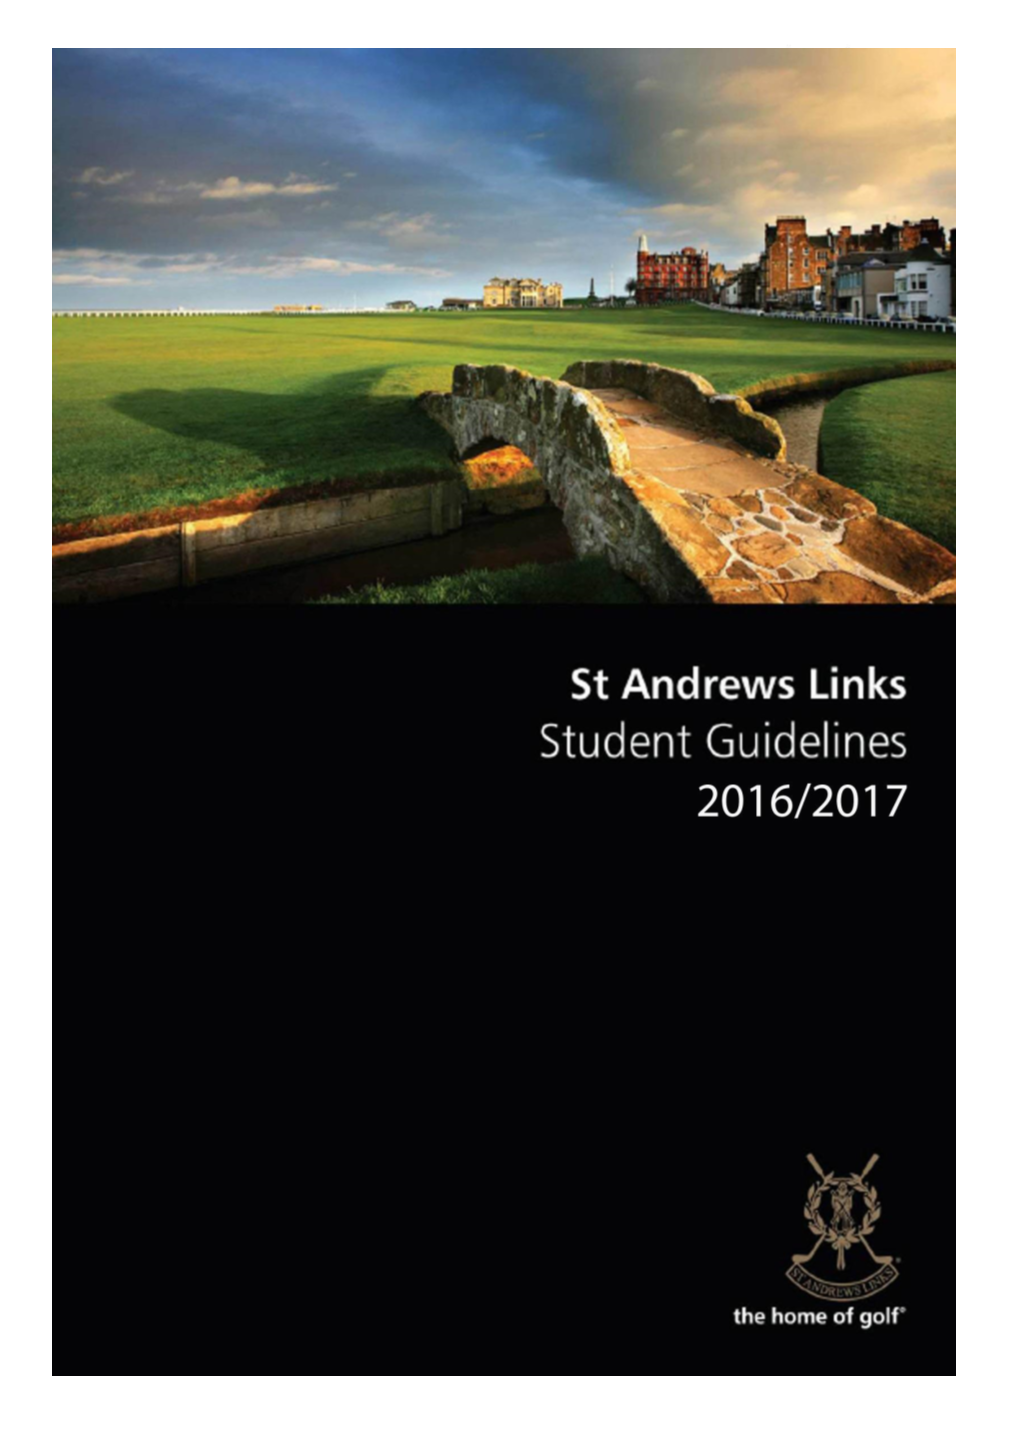 St Andrews Links Is the Home of Golf Where the Game Has Been Played for at Least Six Centuries